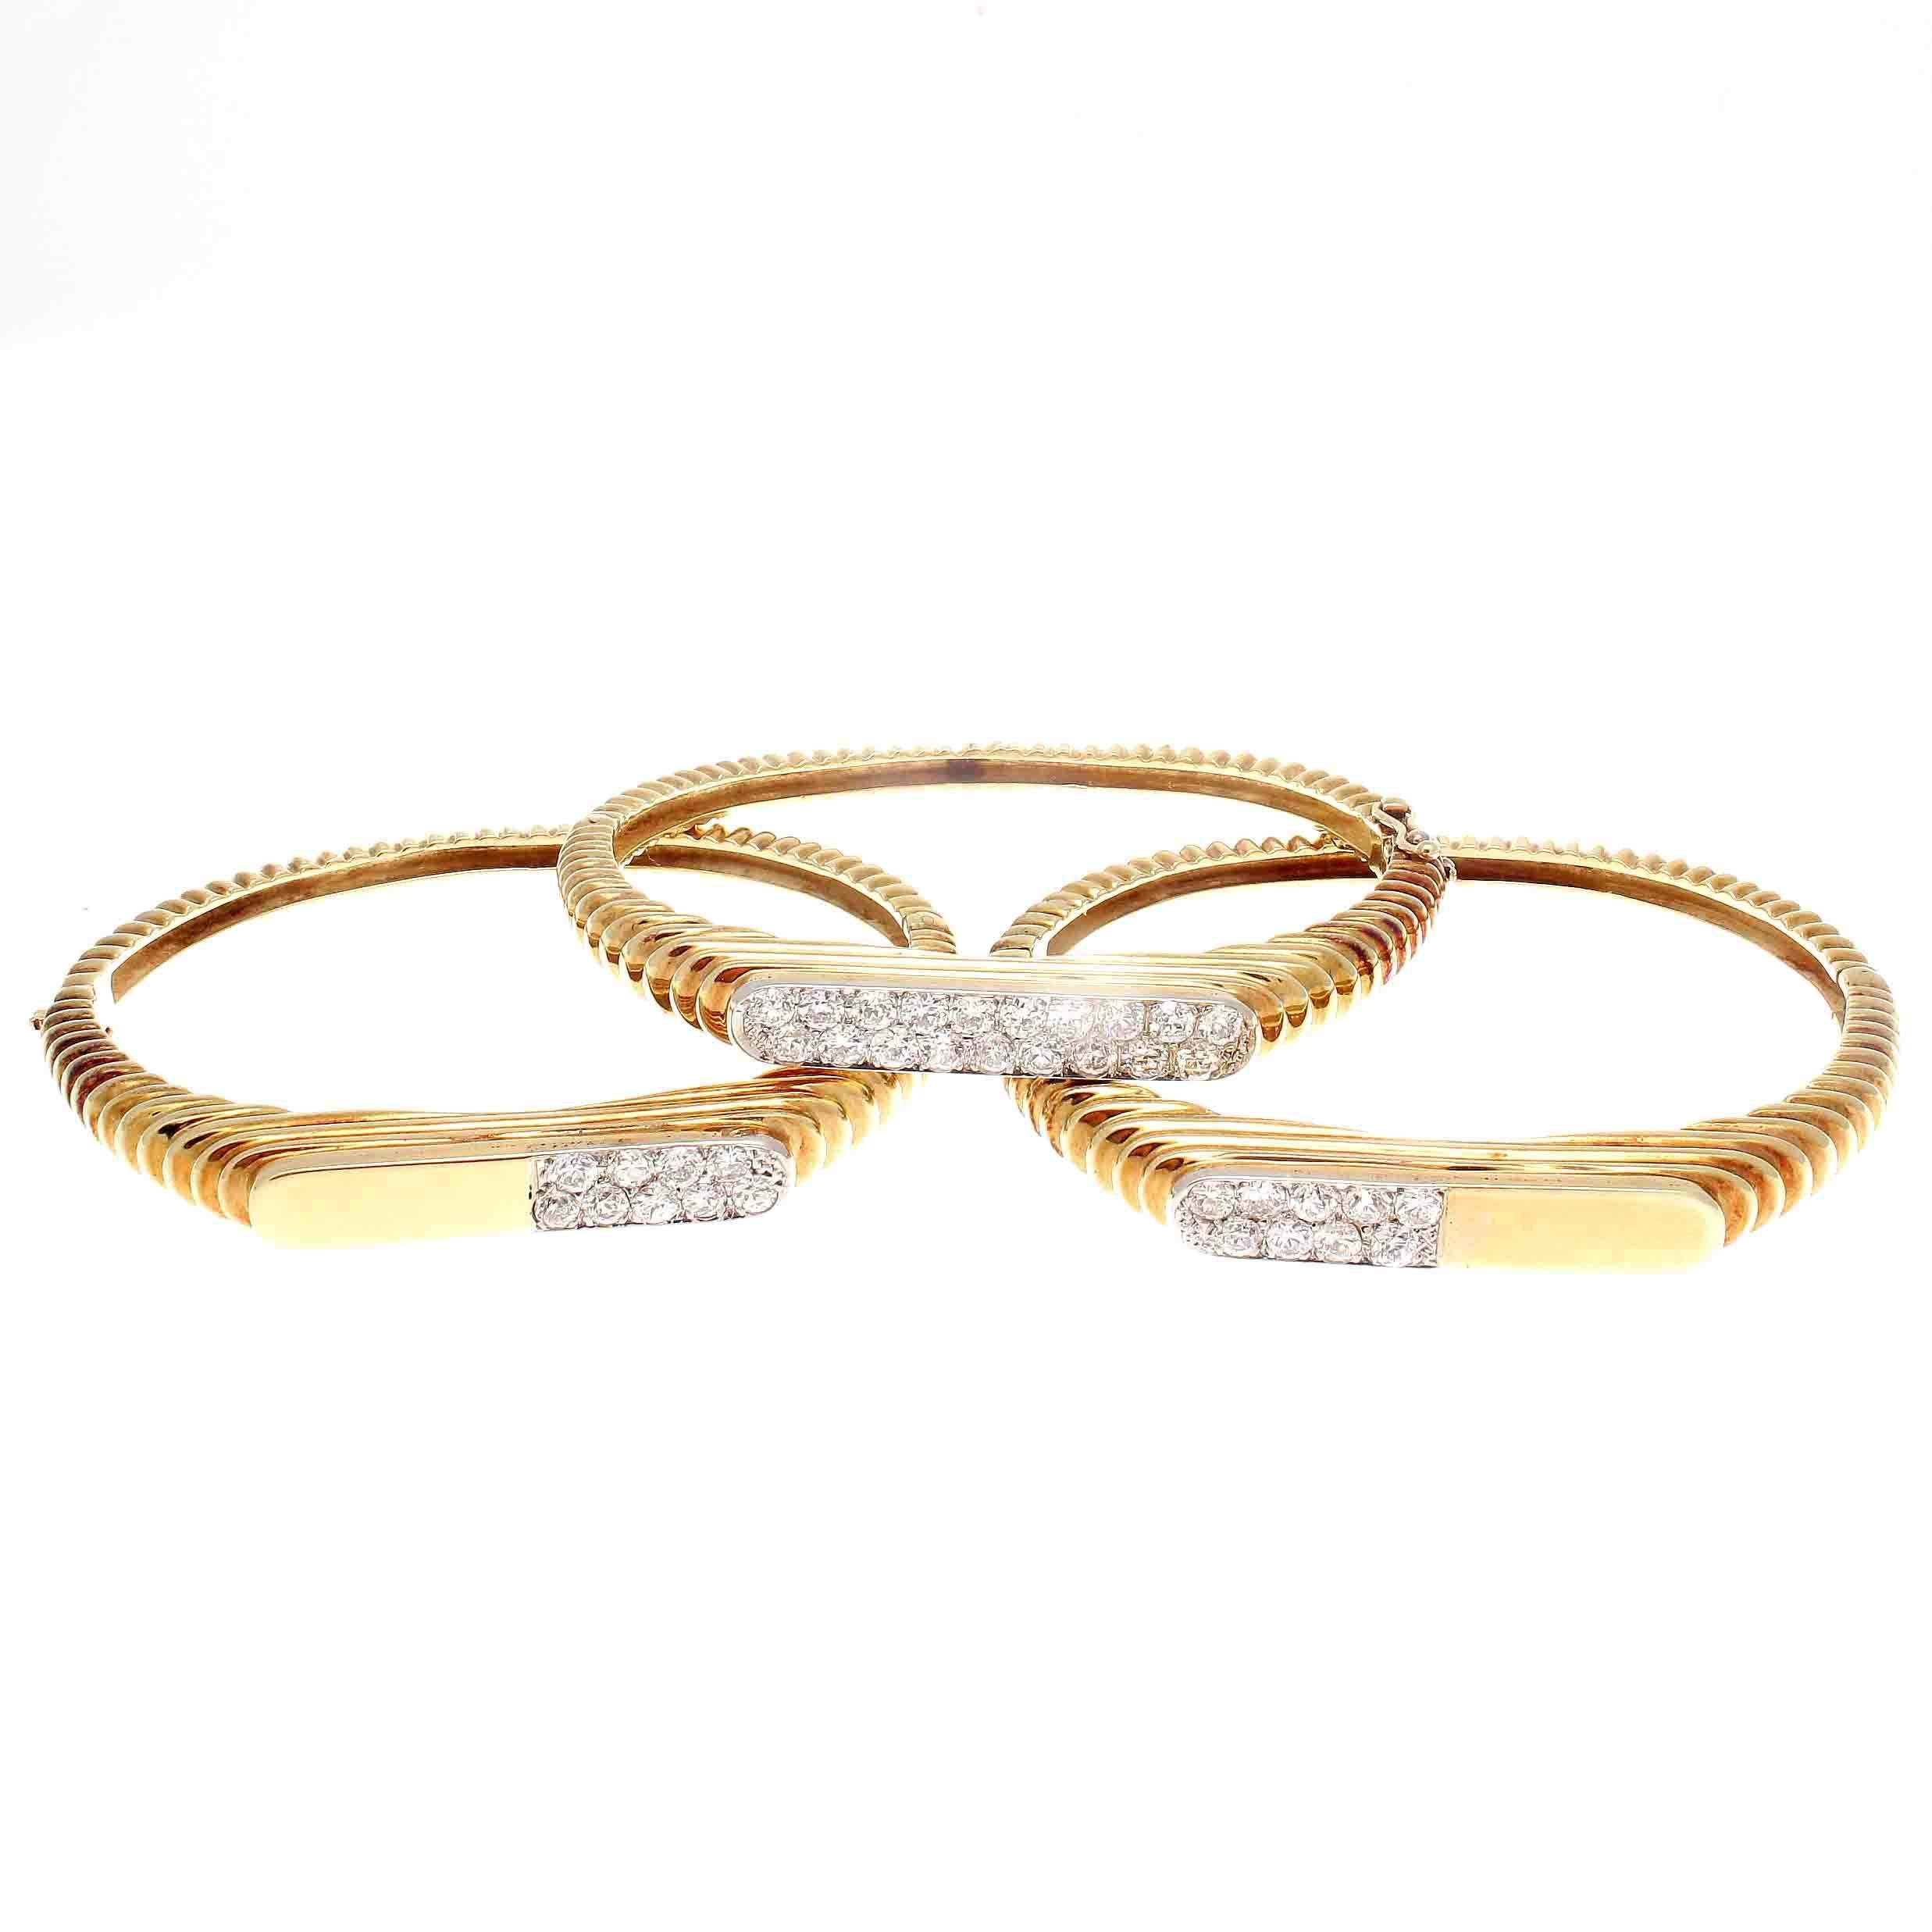 Mix and match however you like with these stylish bangles. Featuring 37 colorless diamonds weighing approximately 2 carats. Hand crafted in 18k yellow gold.